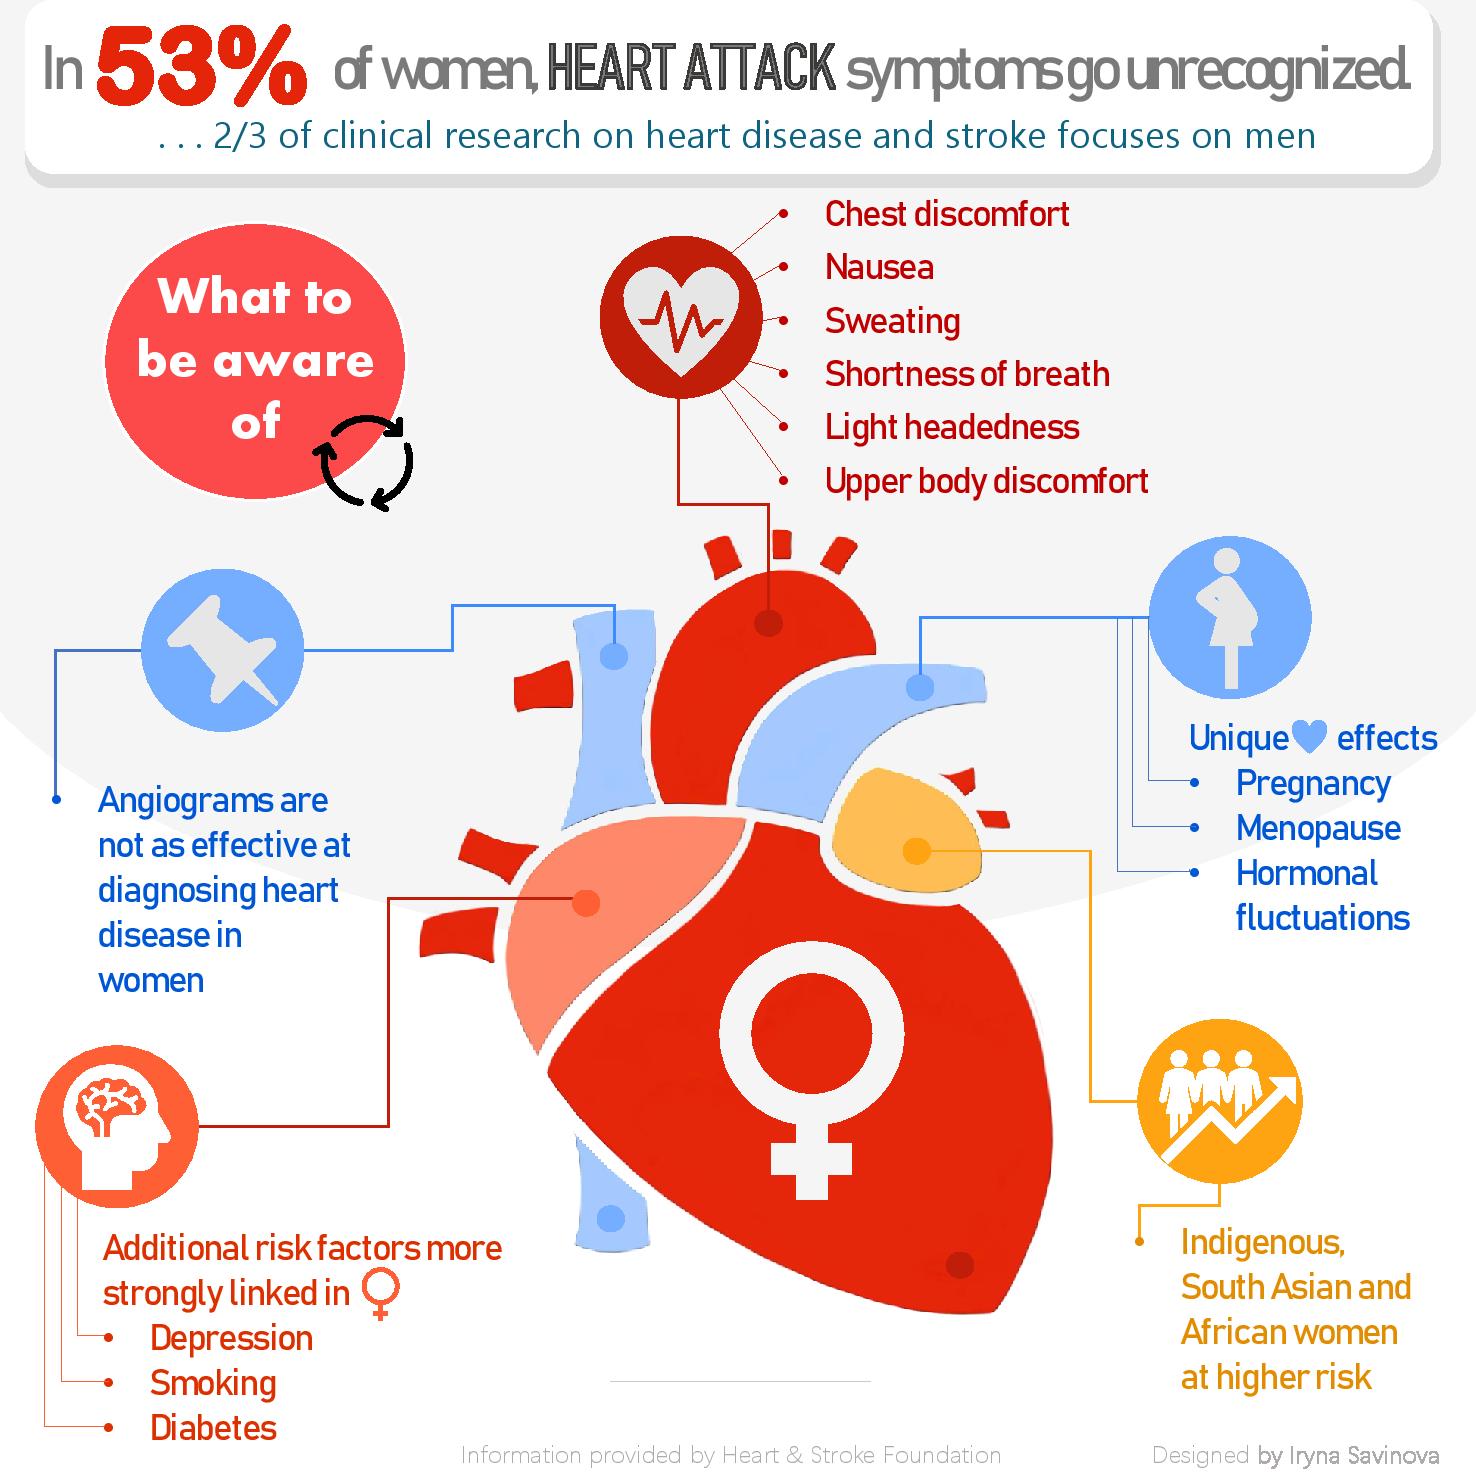 Ground-breaking research into the impact of menopause on the heart